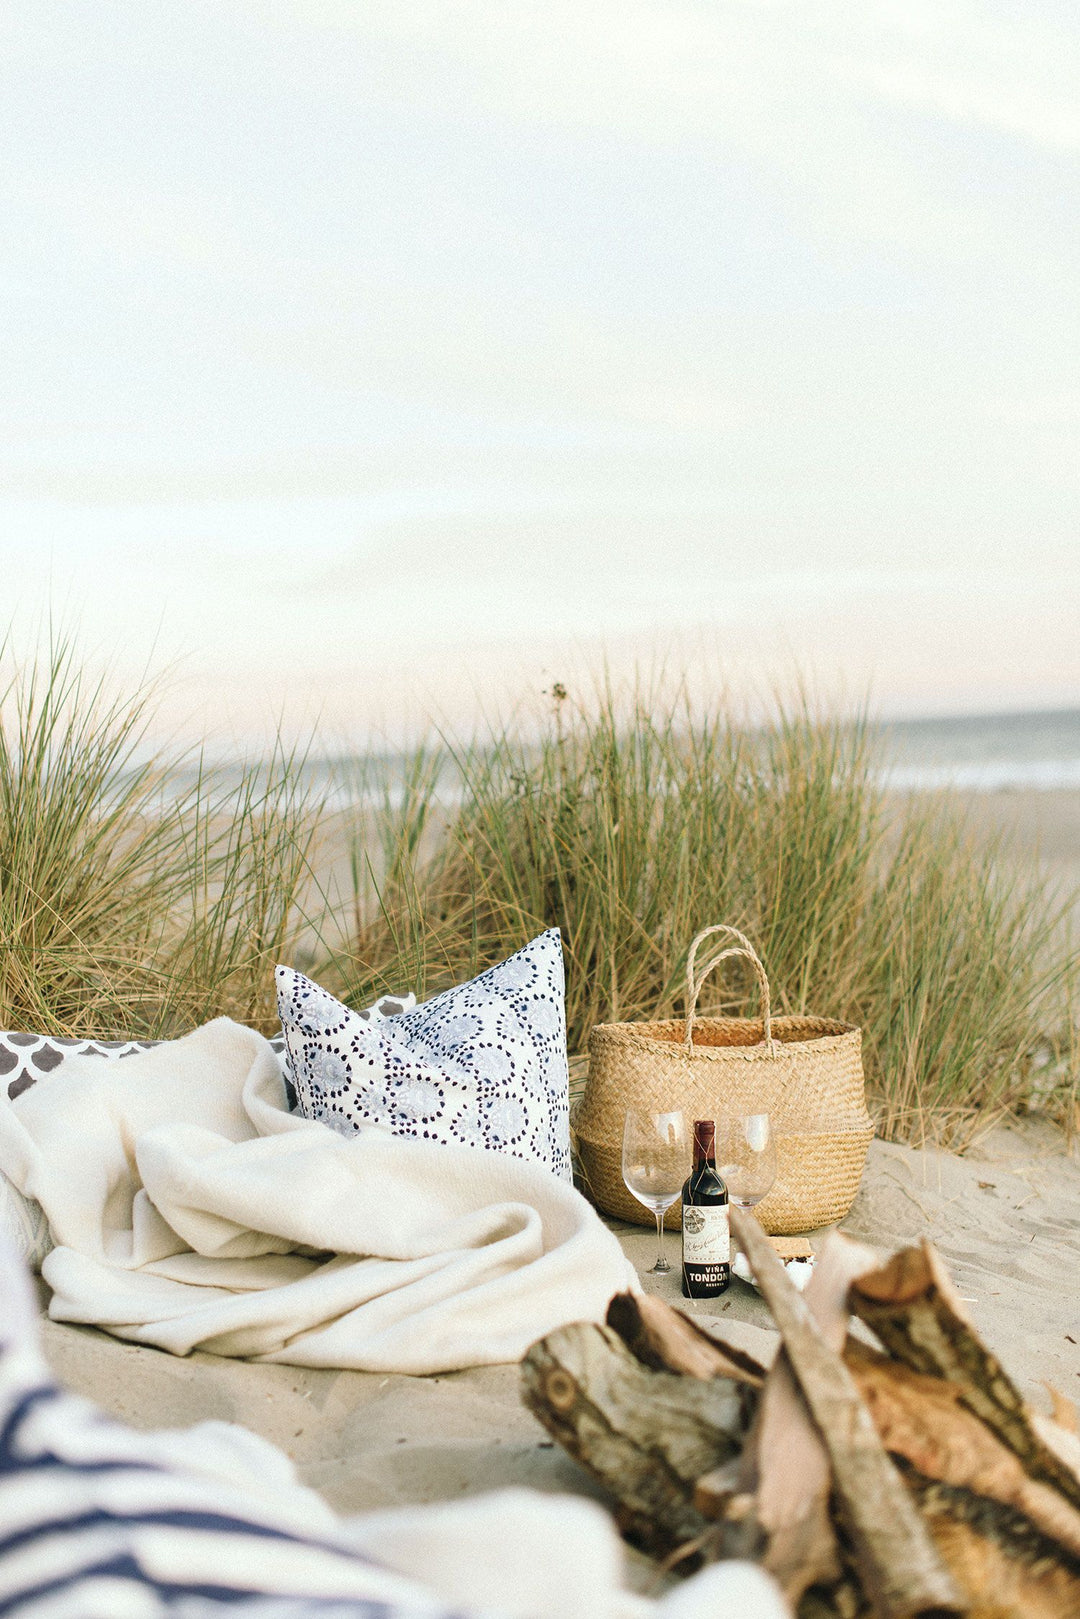 Beach Day with blanket, pillow, grass bag, wine and glasses